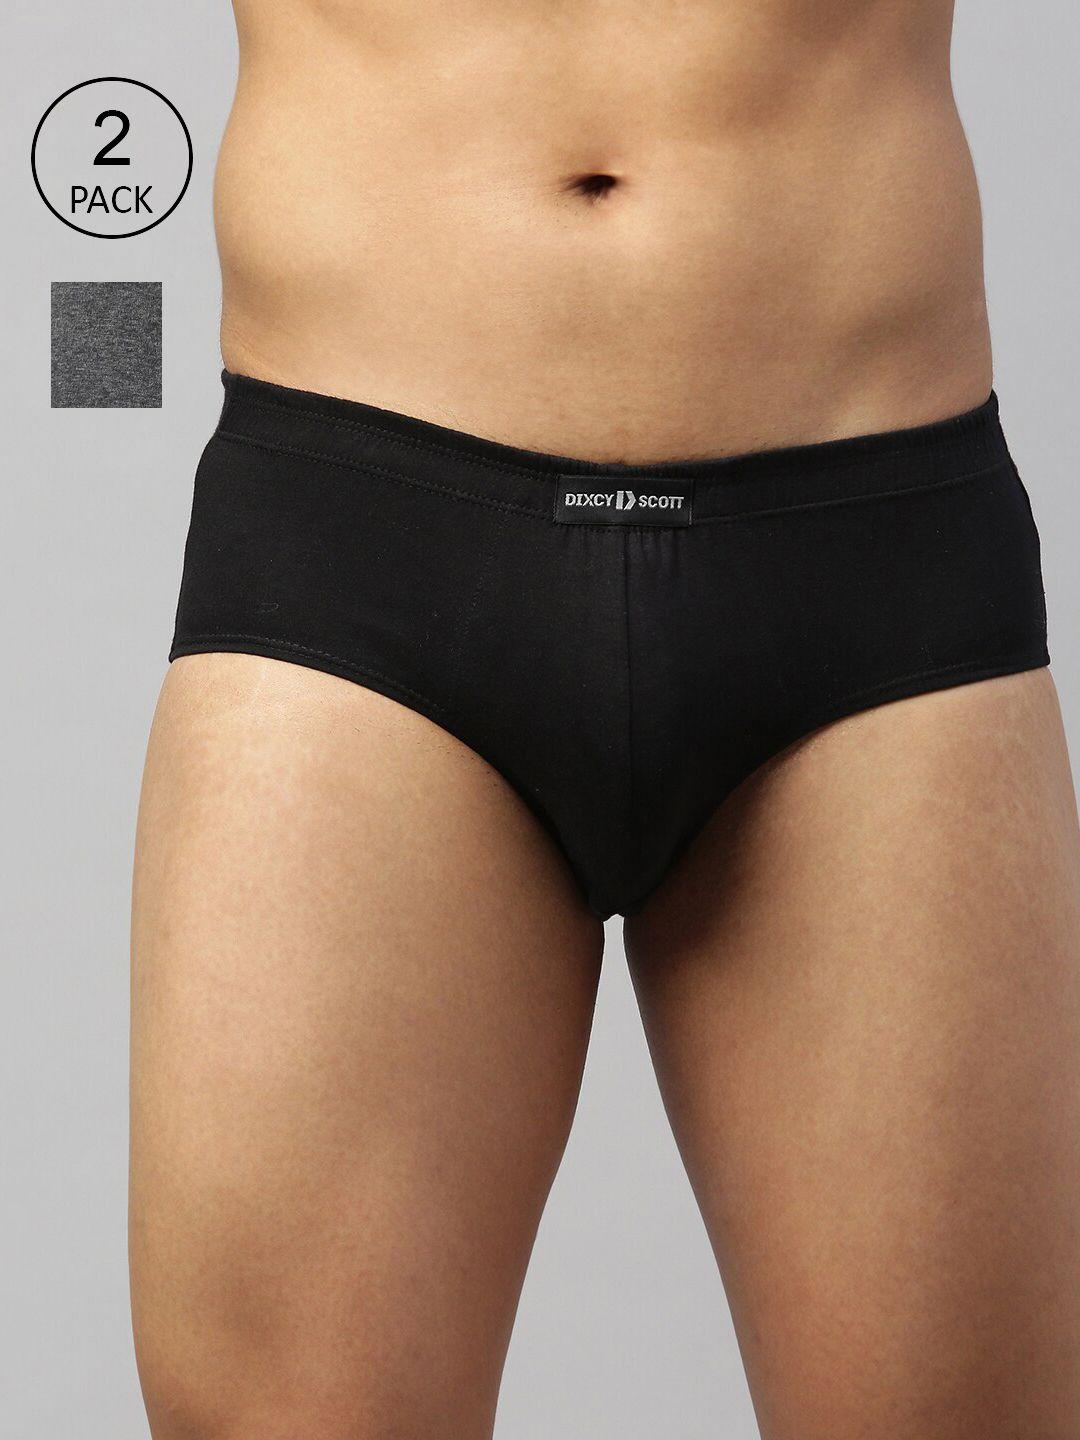 dixcy-scott-maximus-men-pack-of-2-charcoal-&-black-solid-pure-cotton-basic-briefs